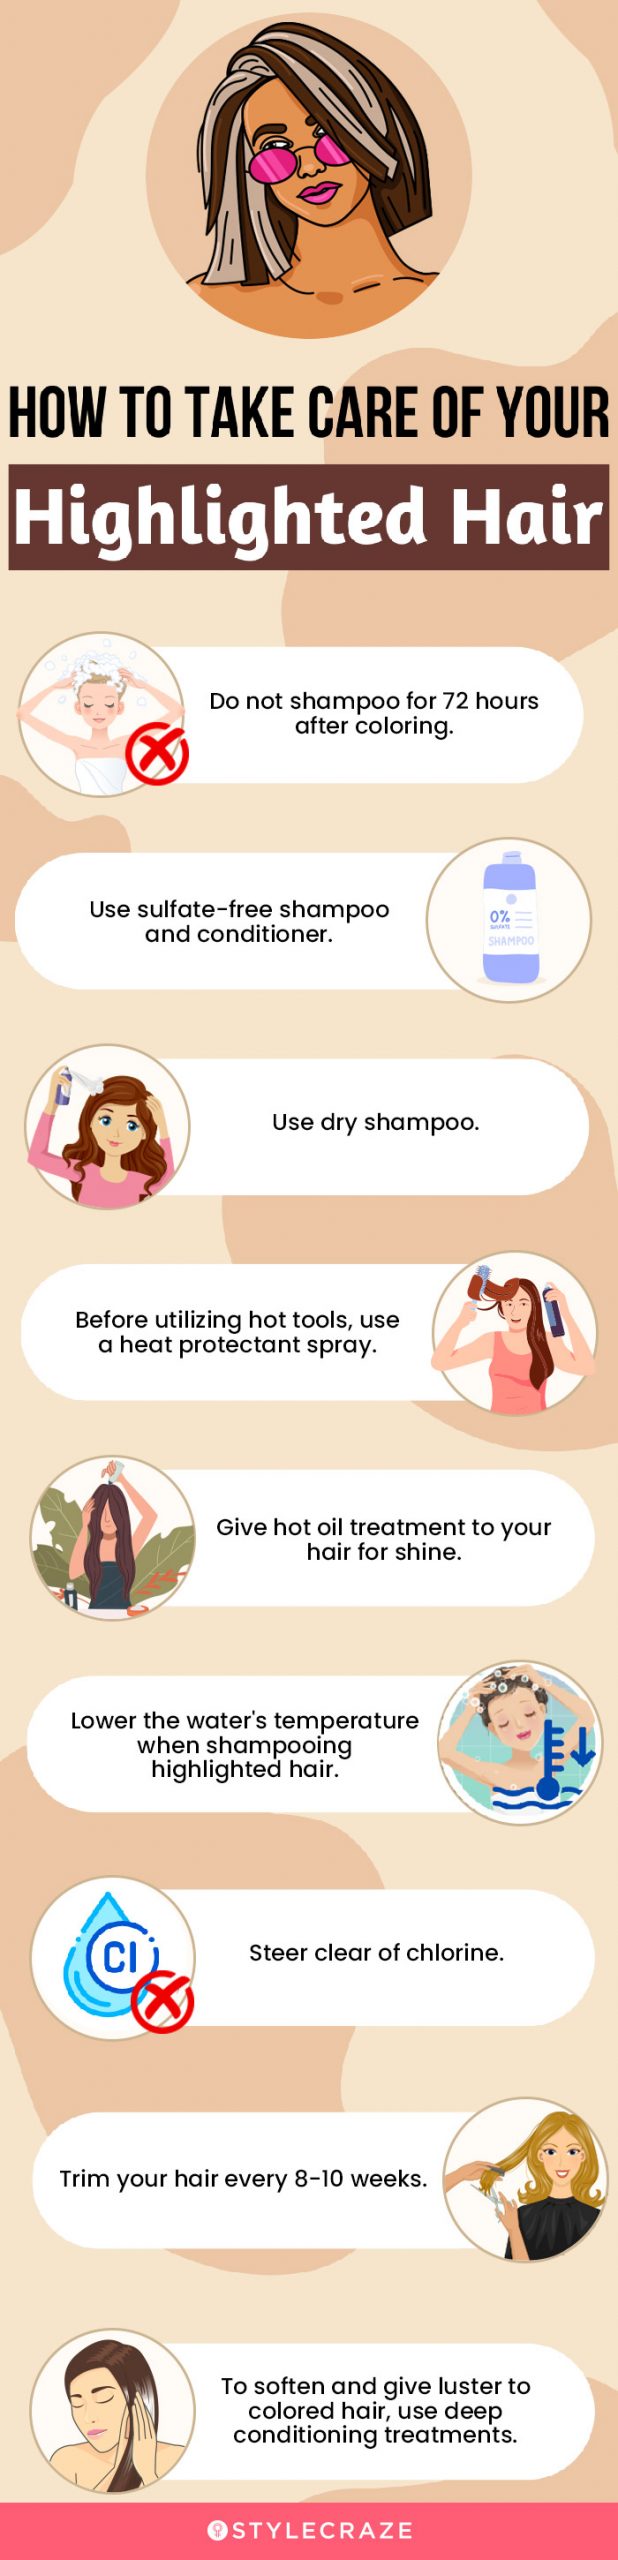 how to take care of your highlited hair [infographic]